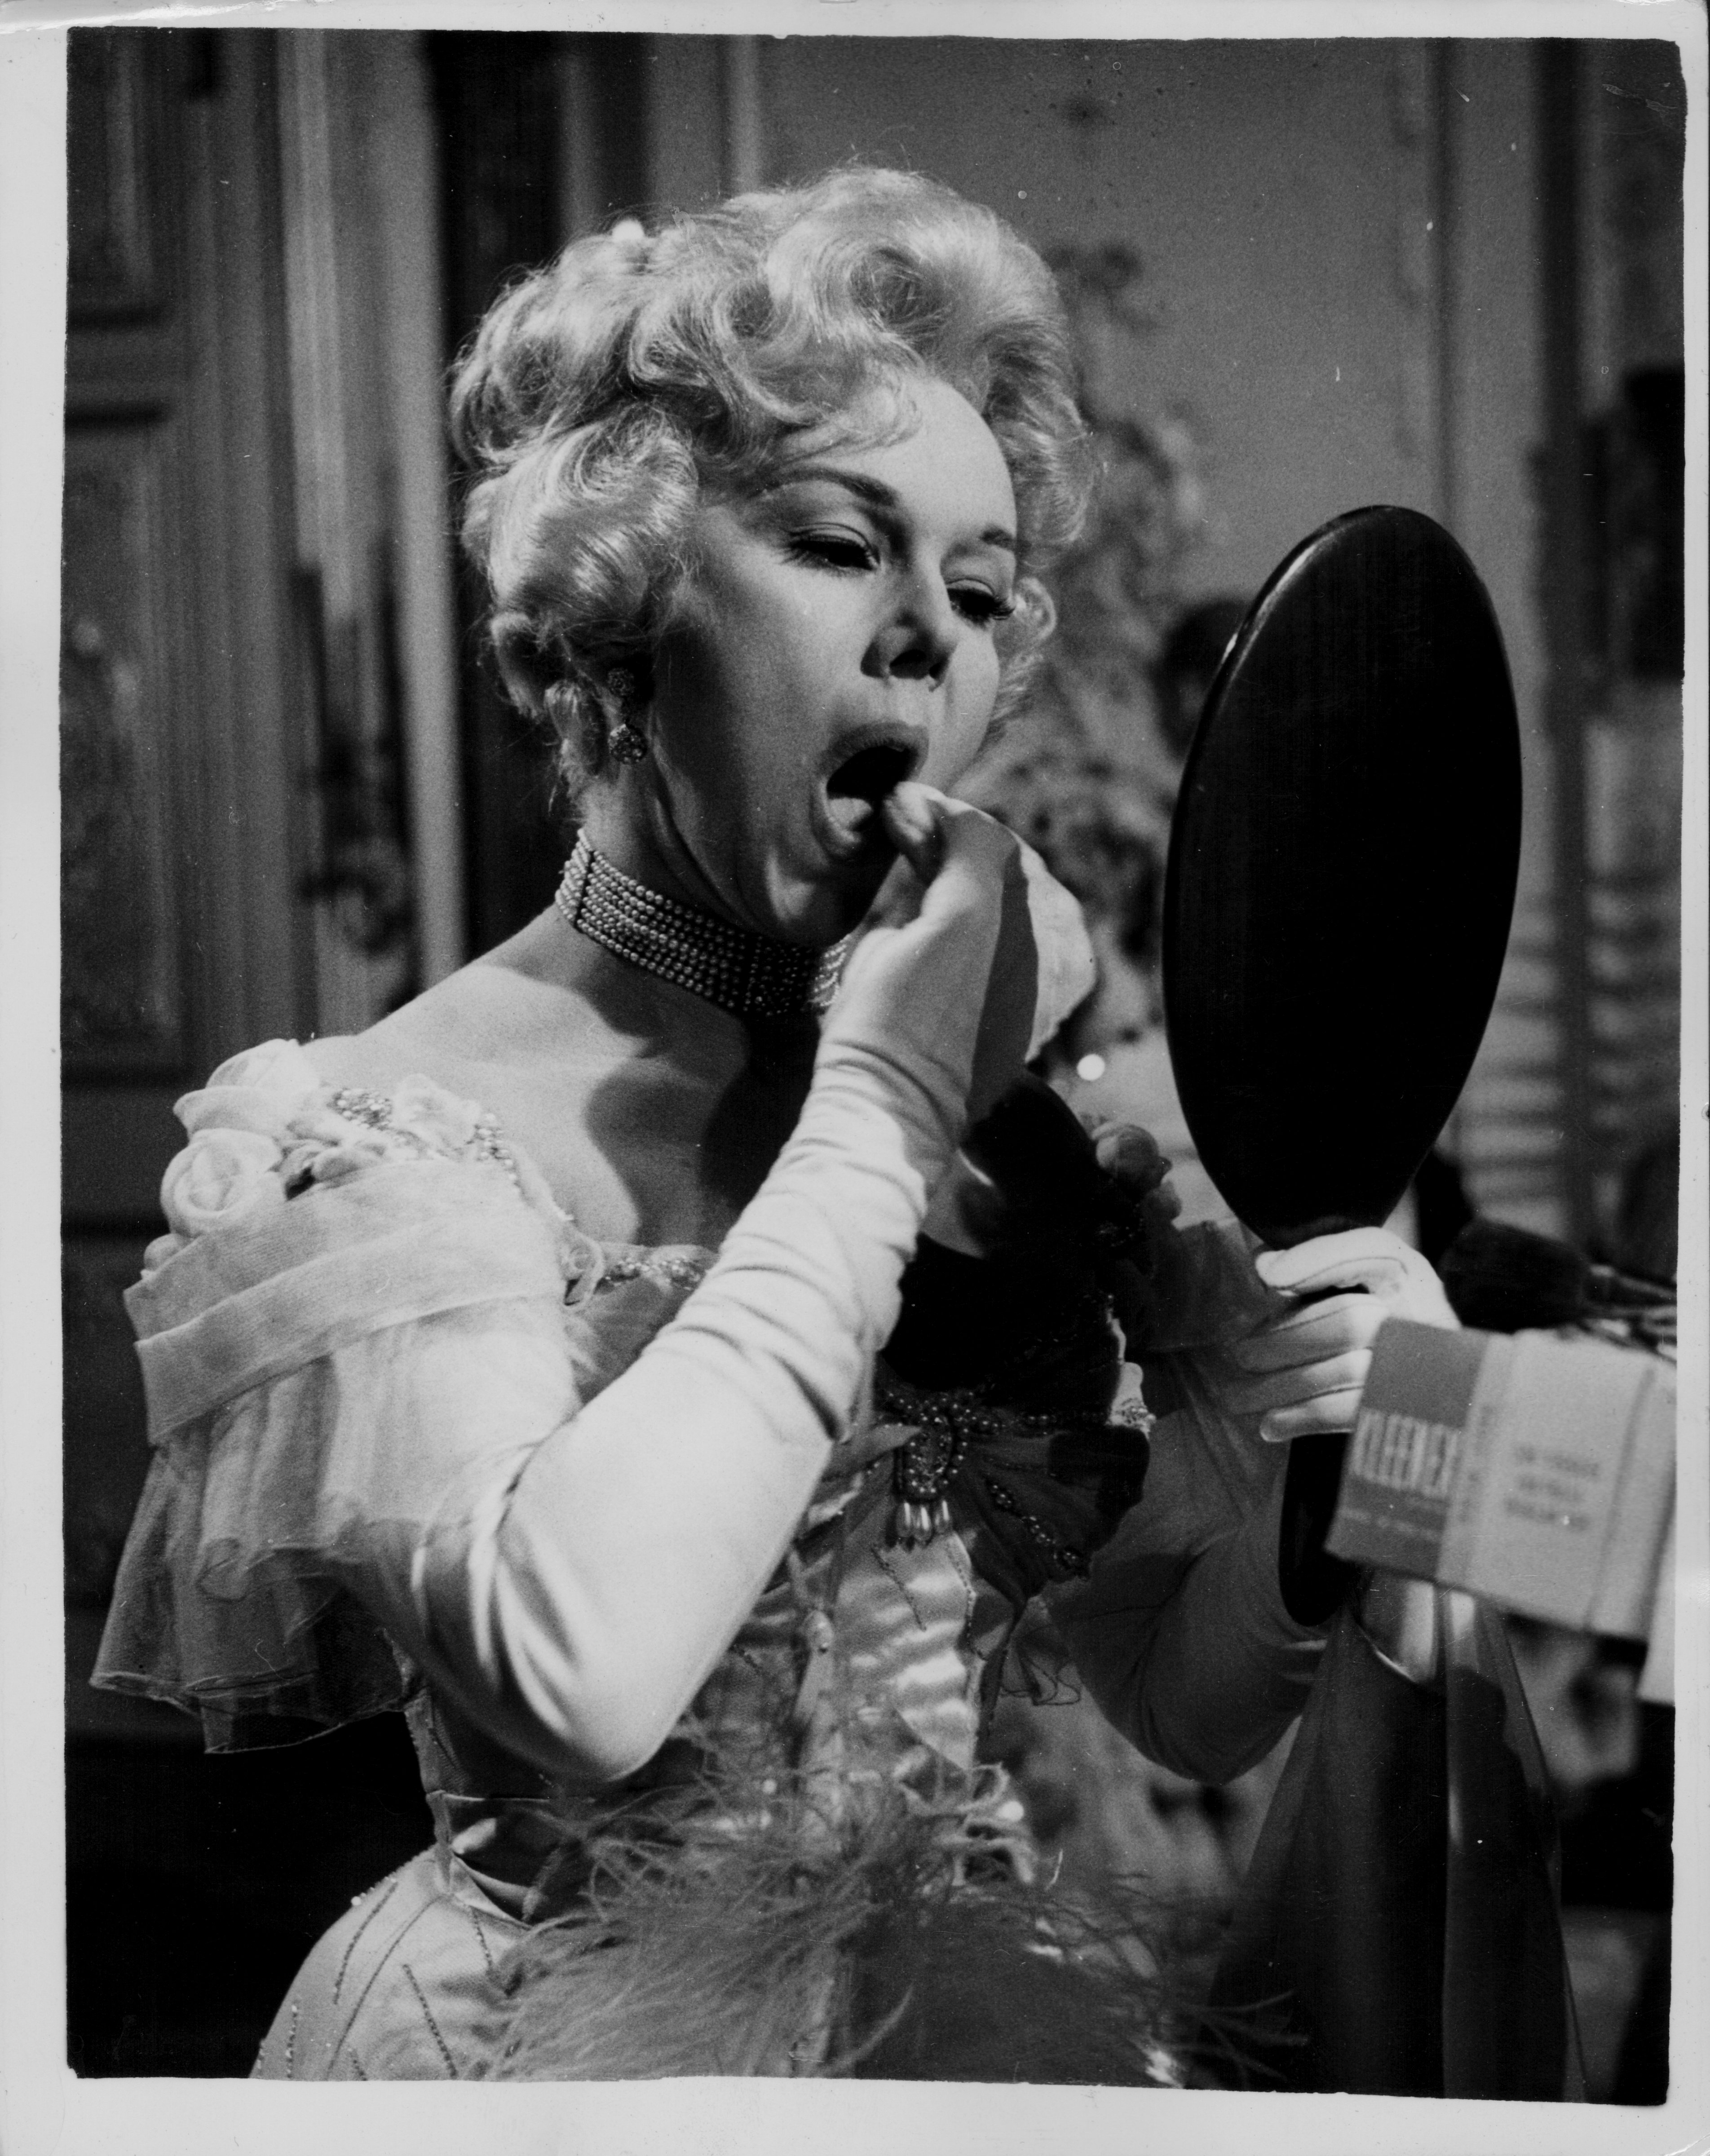 Eva Gabor applying on make-up before shooting a scene. | Photo: Getty Images